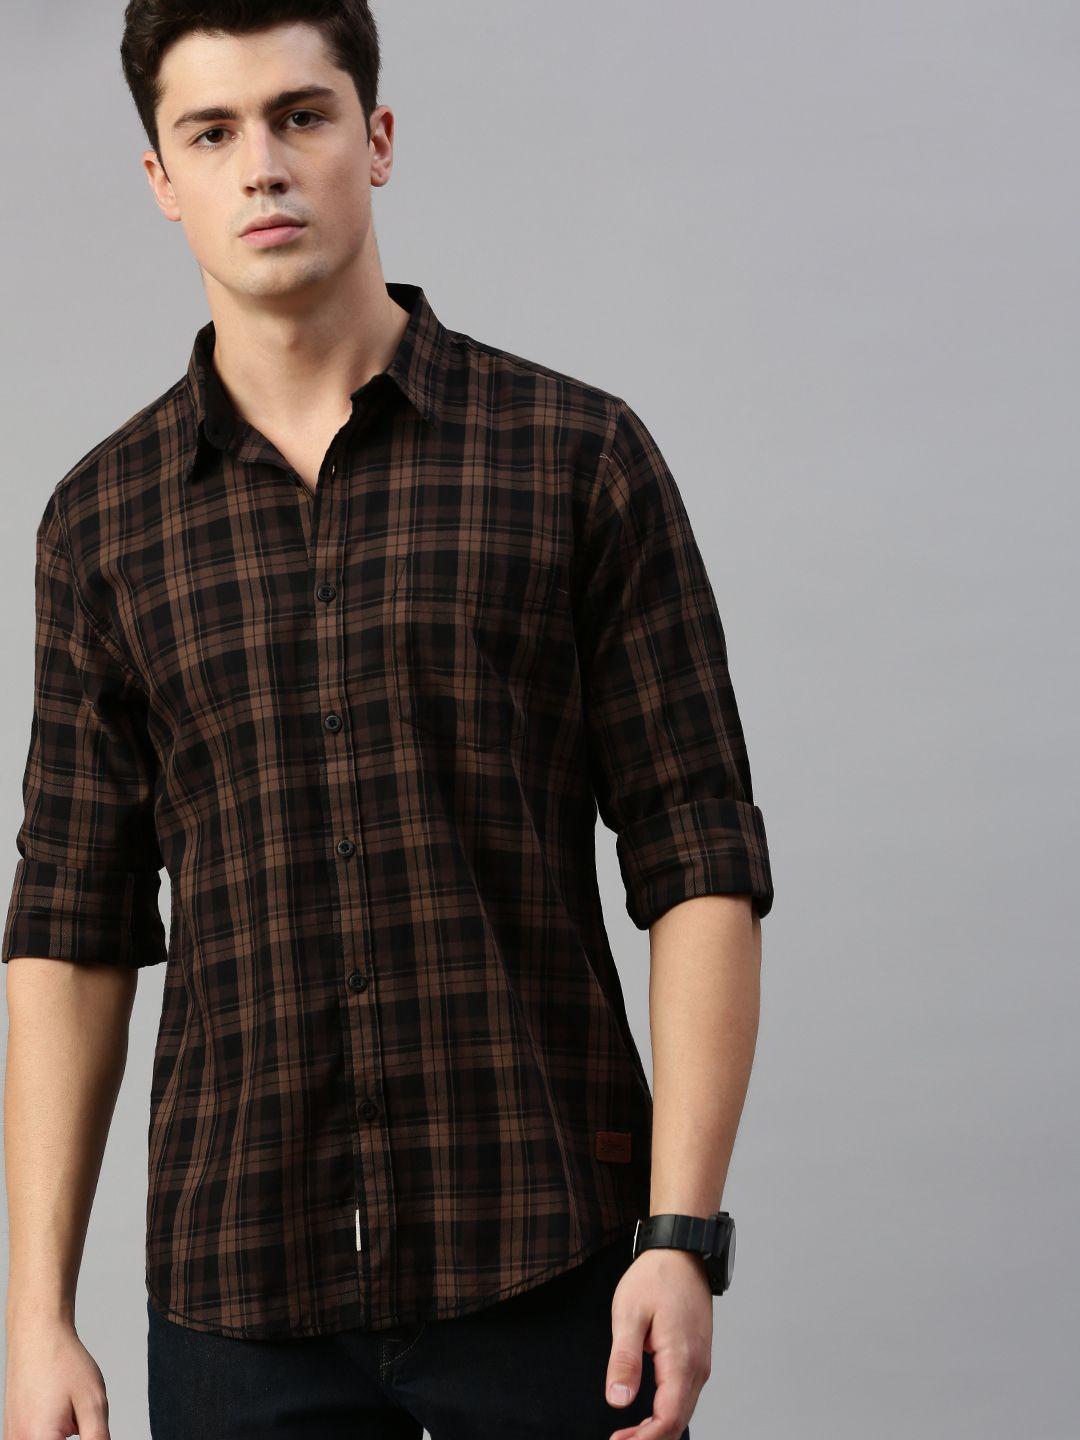 roadster-men-black-&-brown-checked-sustainable-casual-shirt